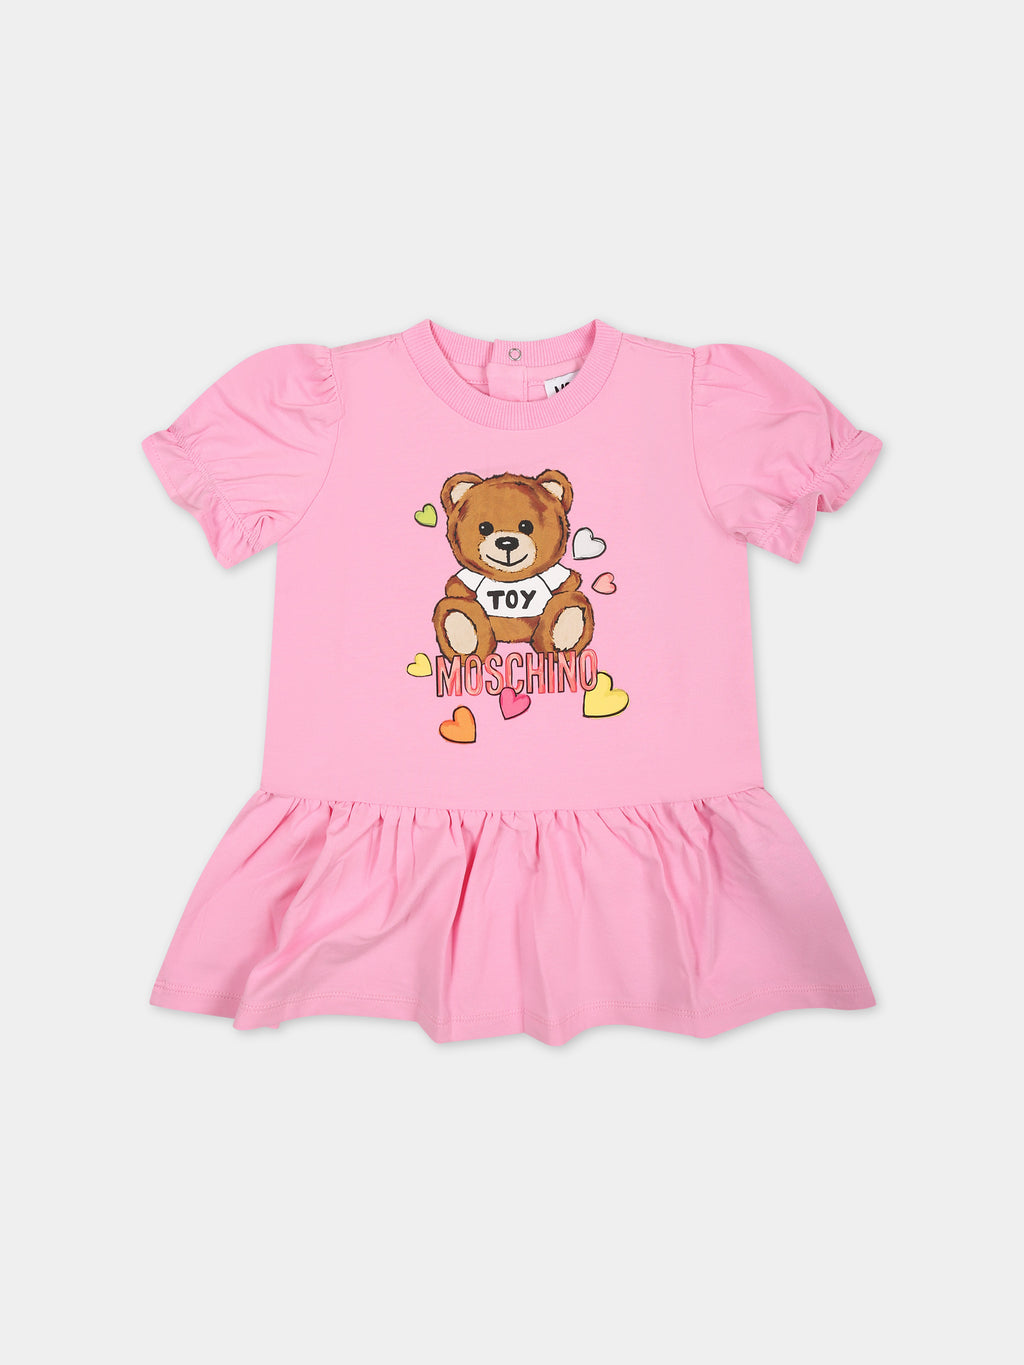 Pink dress for baby girl with Teddy Bear print